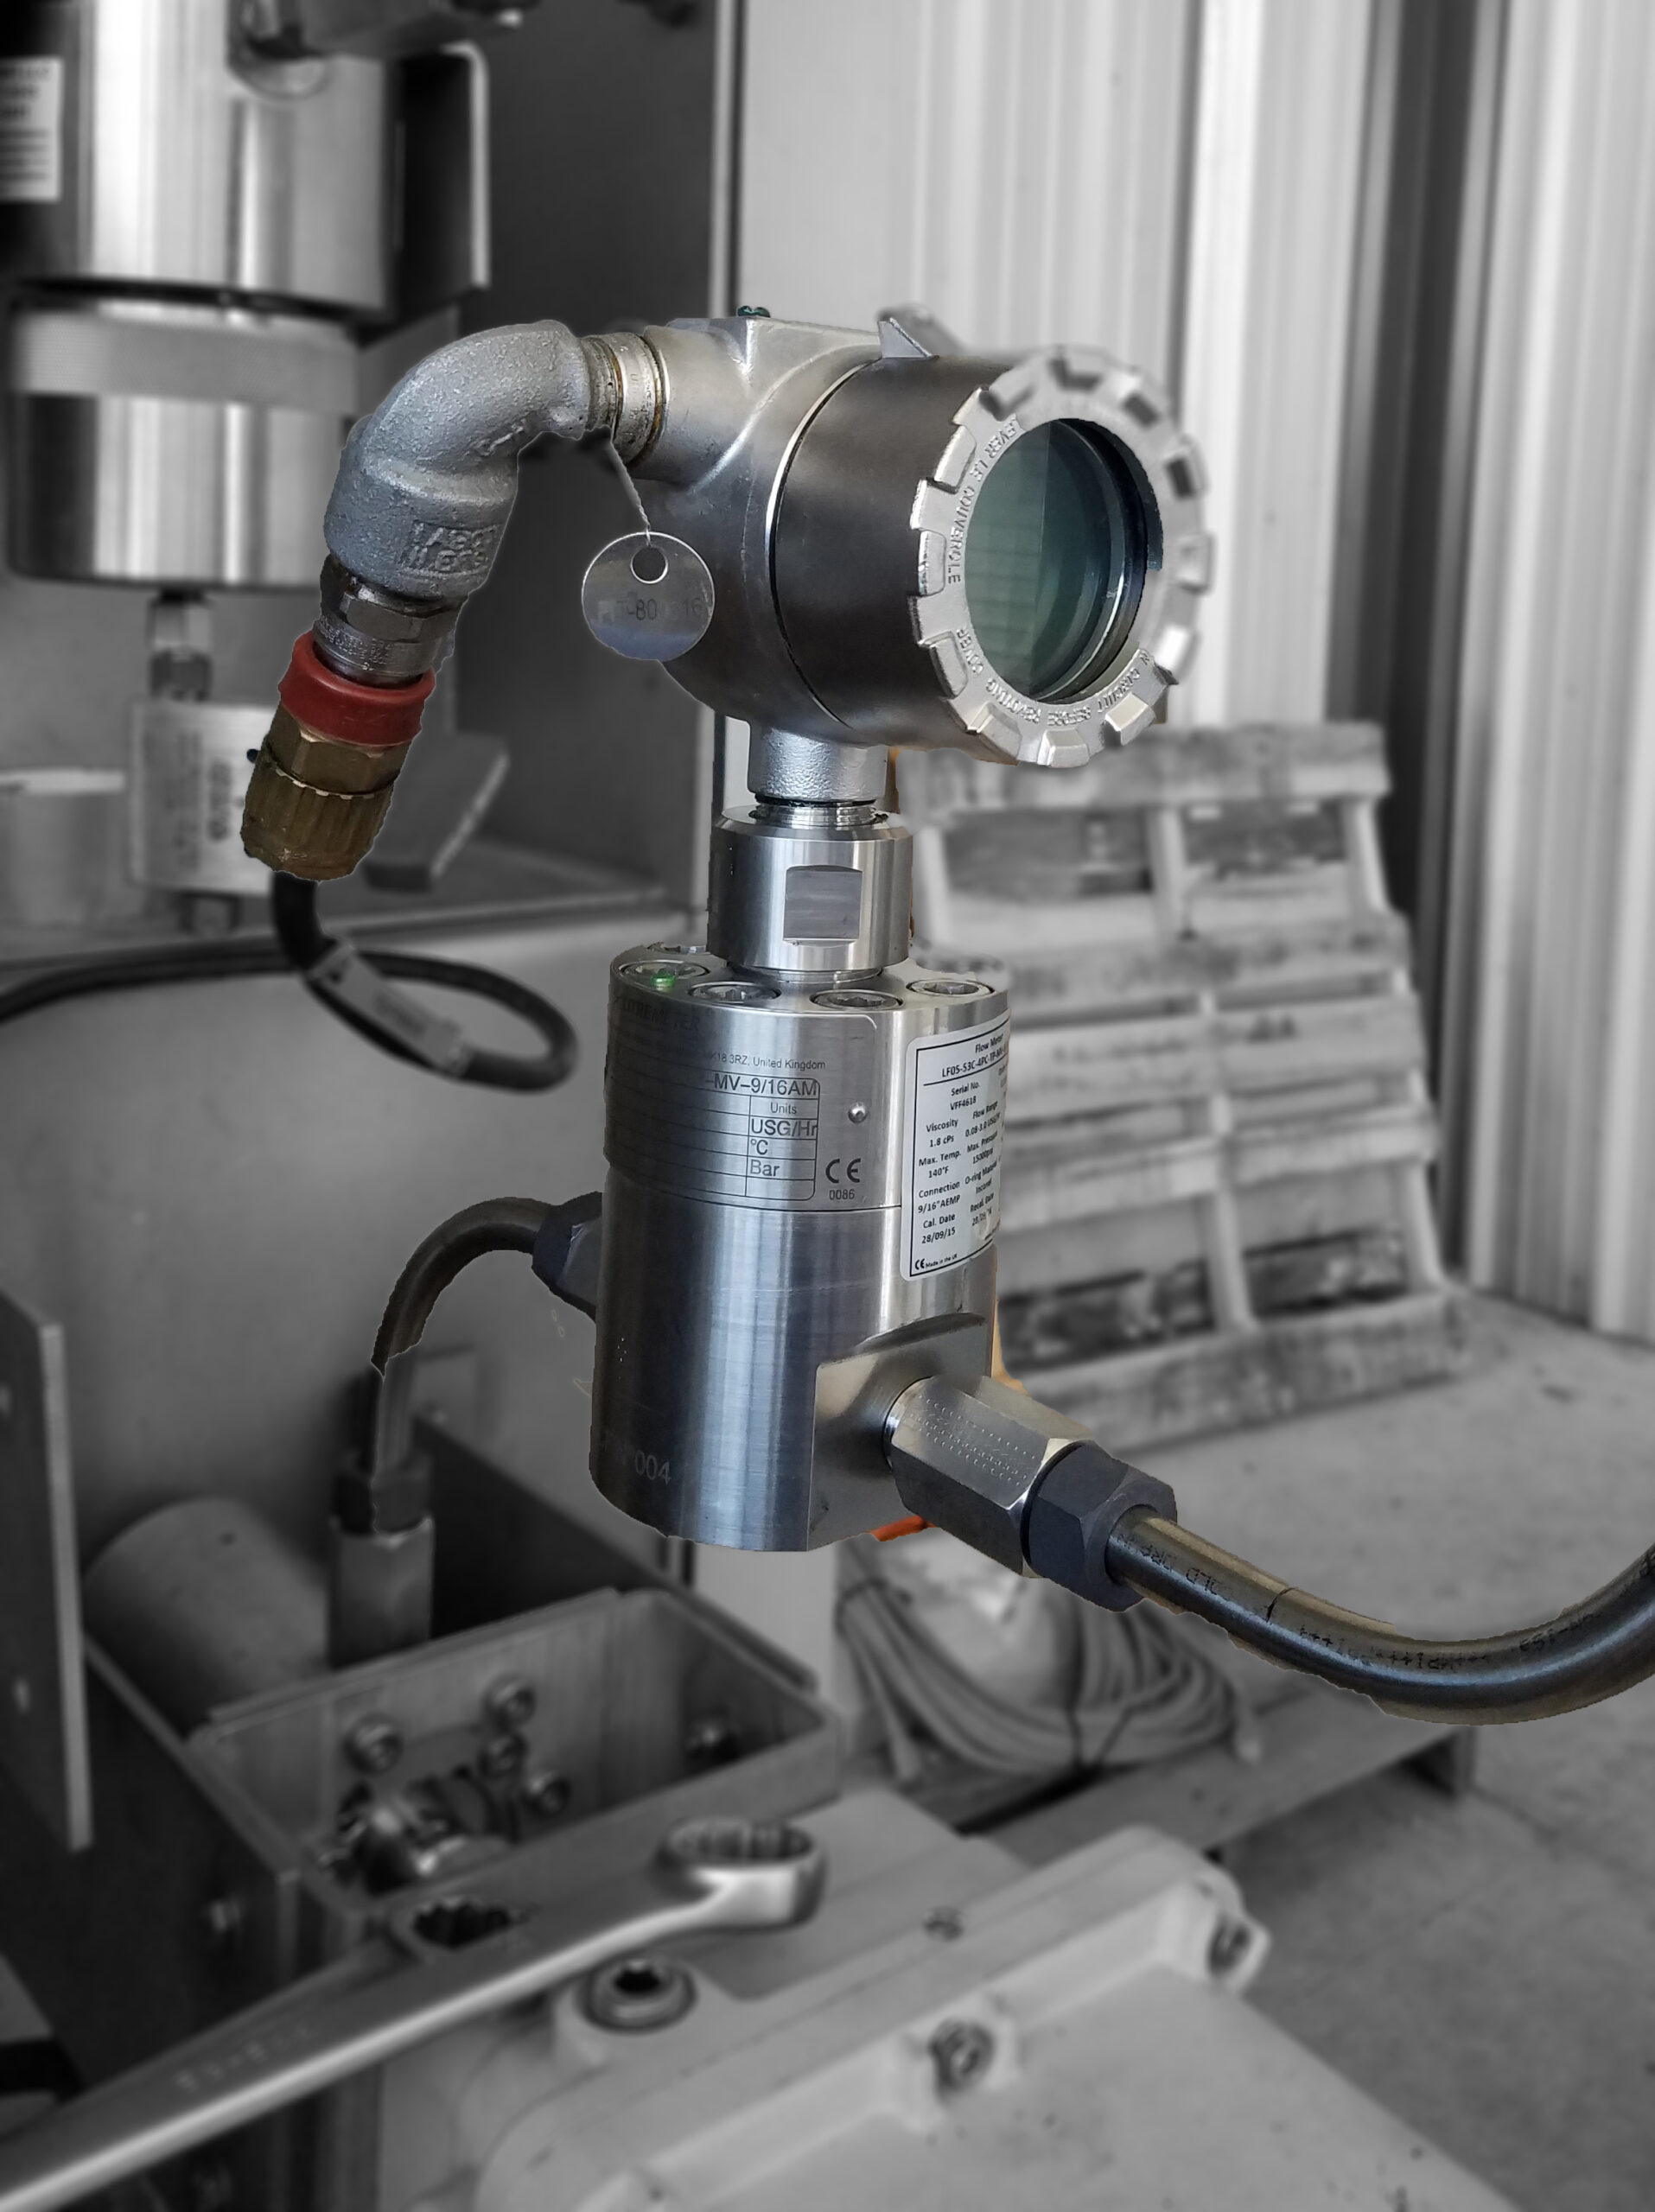 Installation image of a VFF flowmeter with FlowPod display, high pressure, low flow